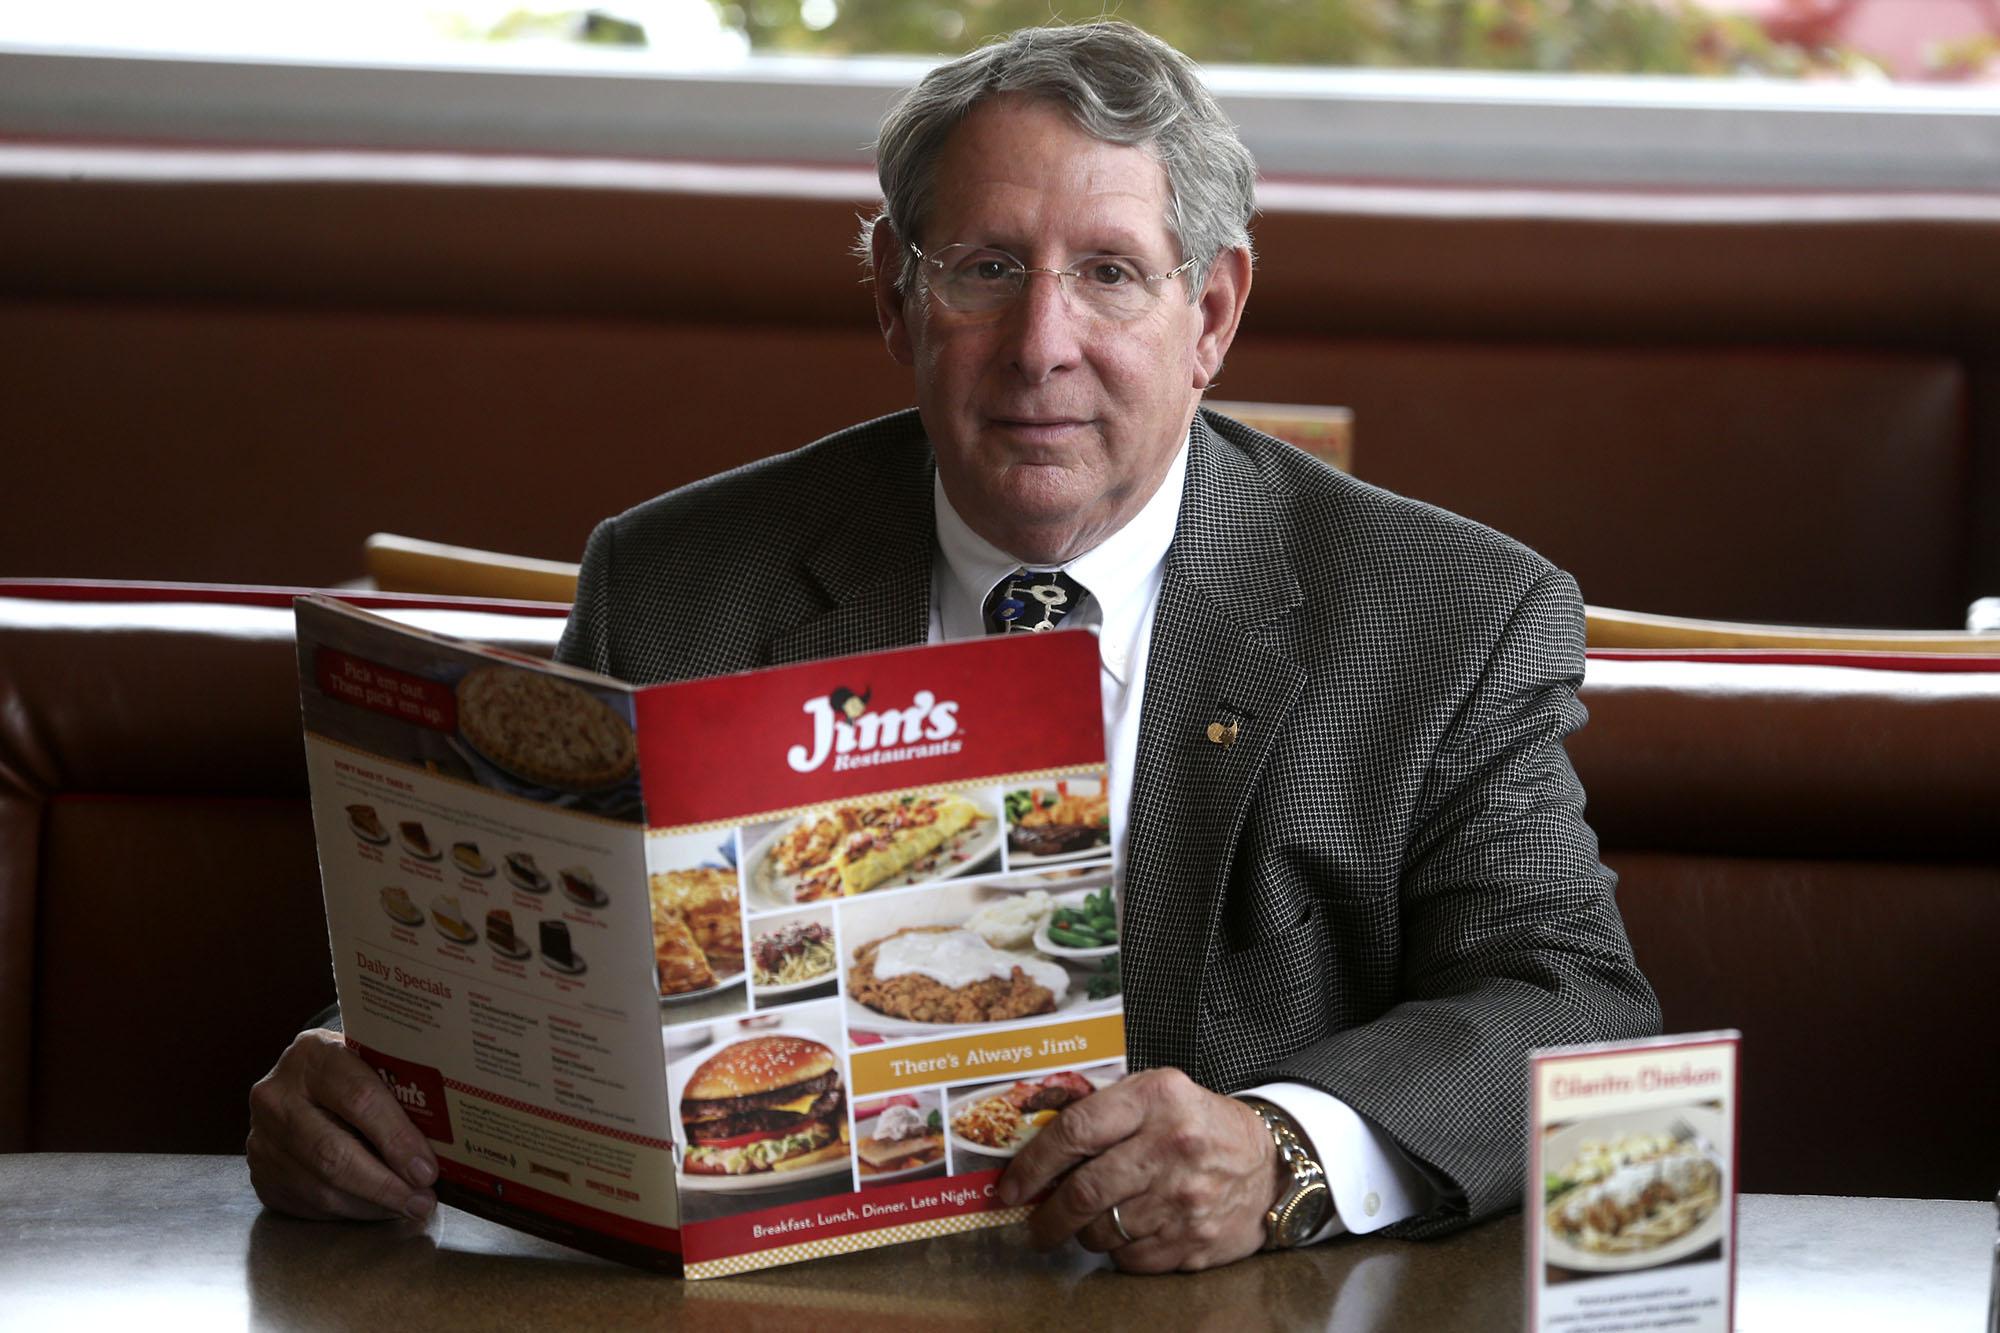 Heirs to Jim’s Restaurants founder battle over family business, fortune in San Antonio probate court